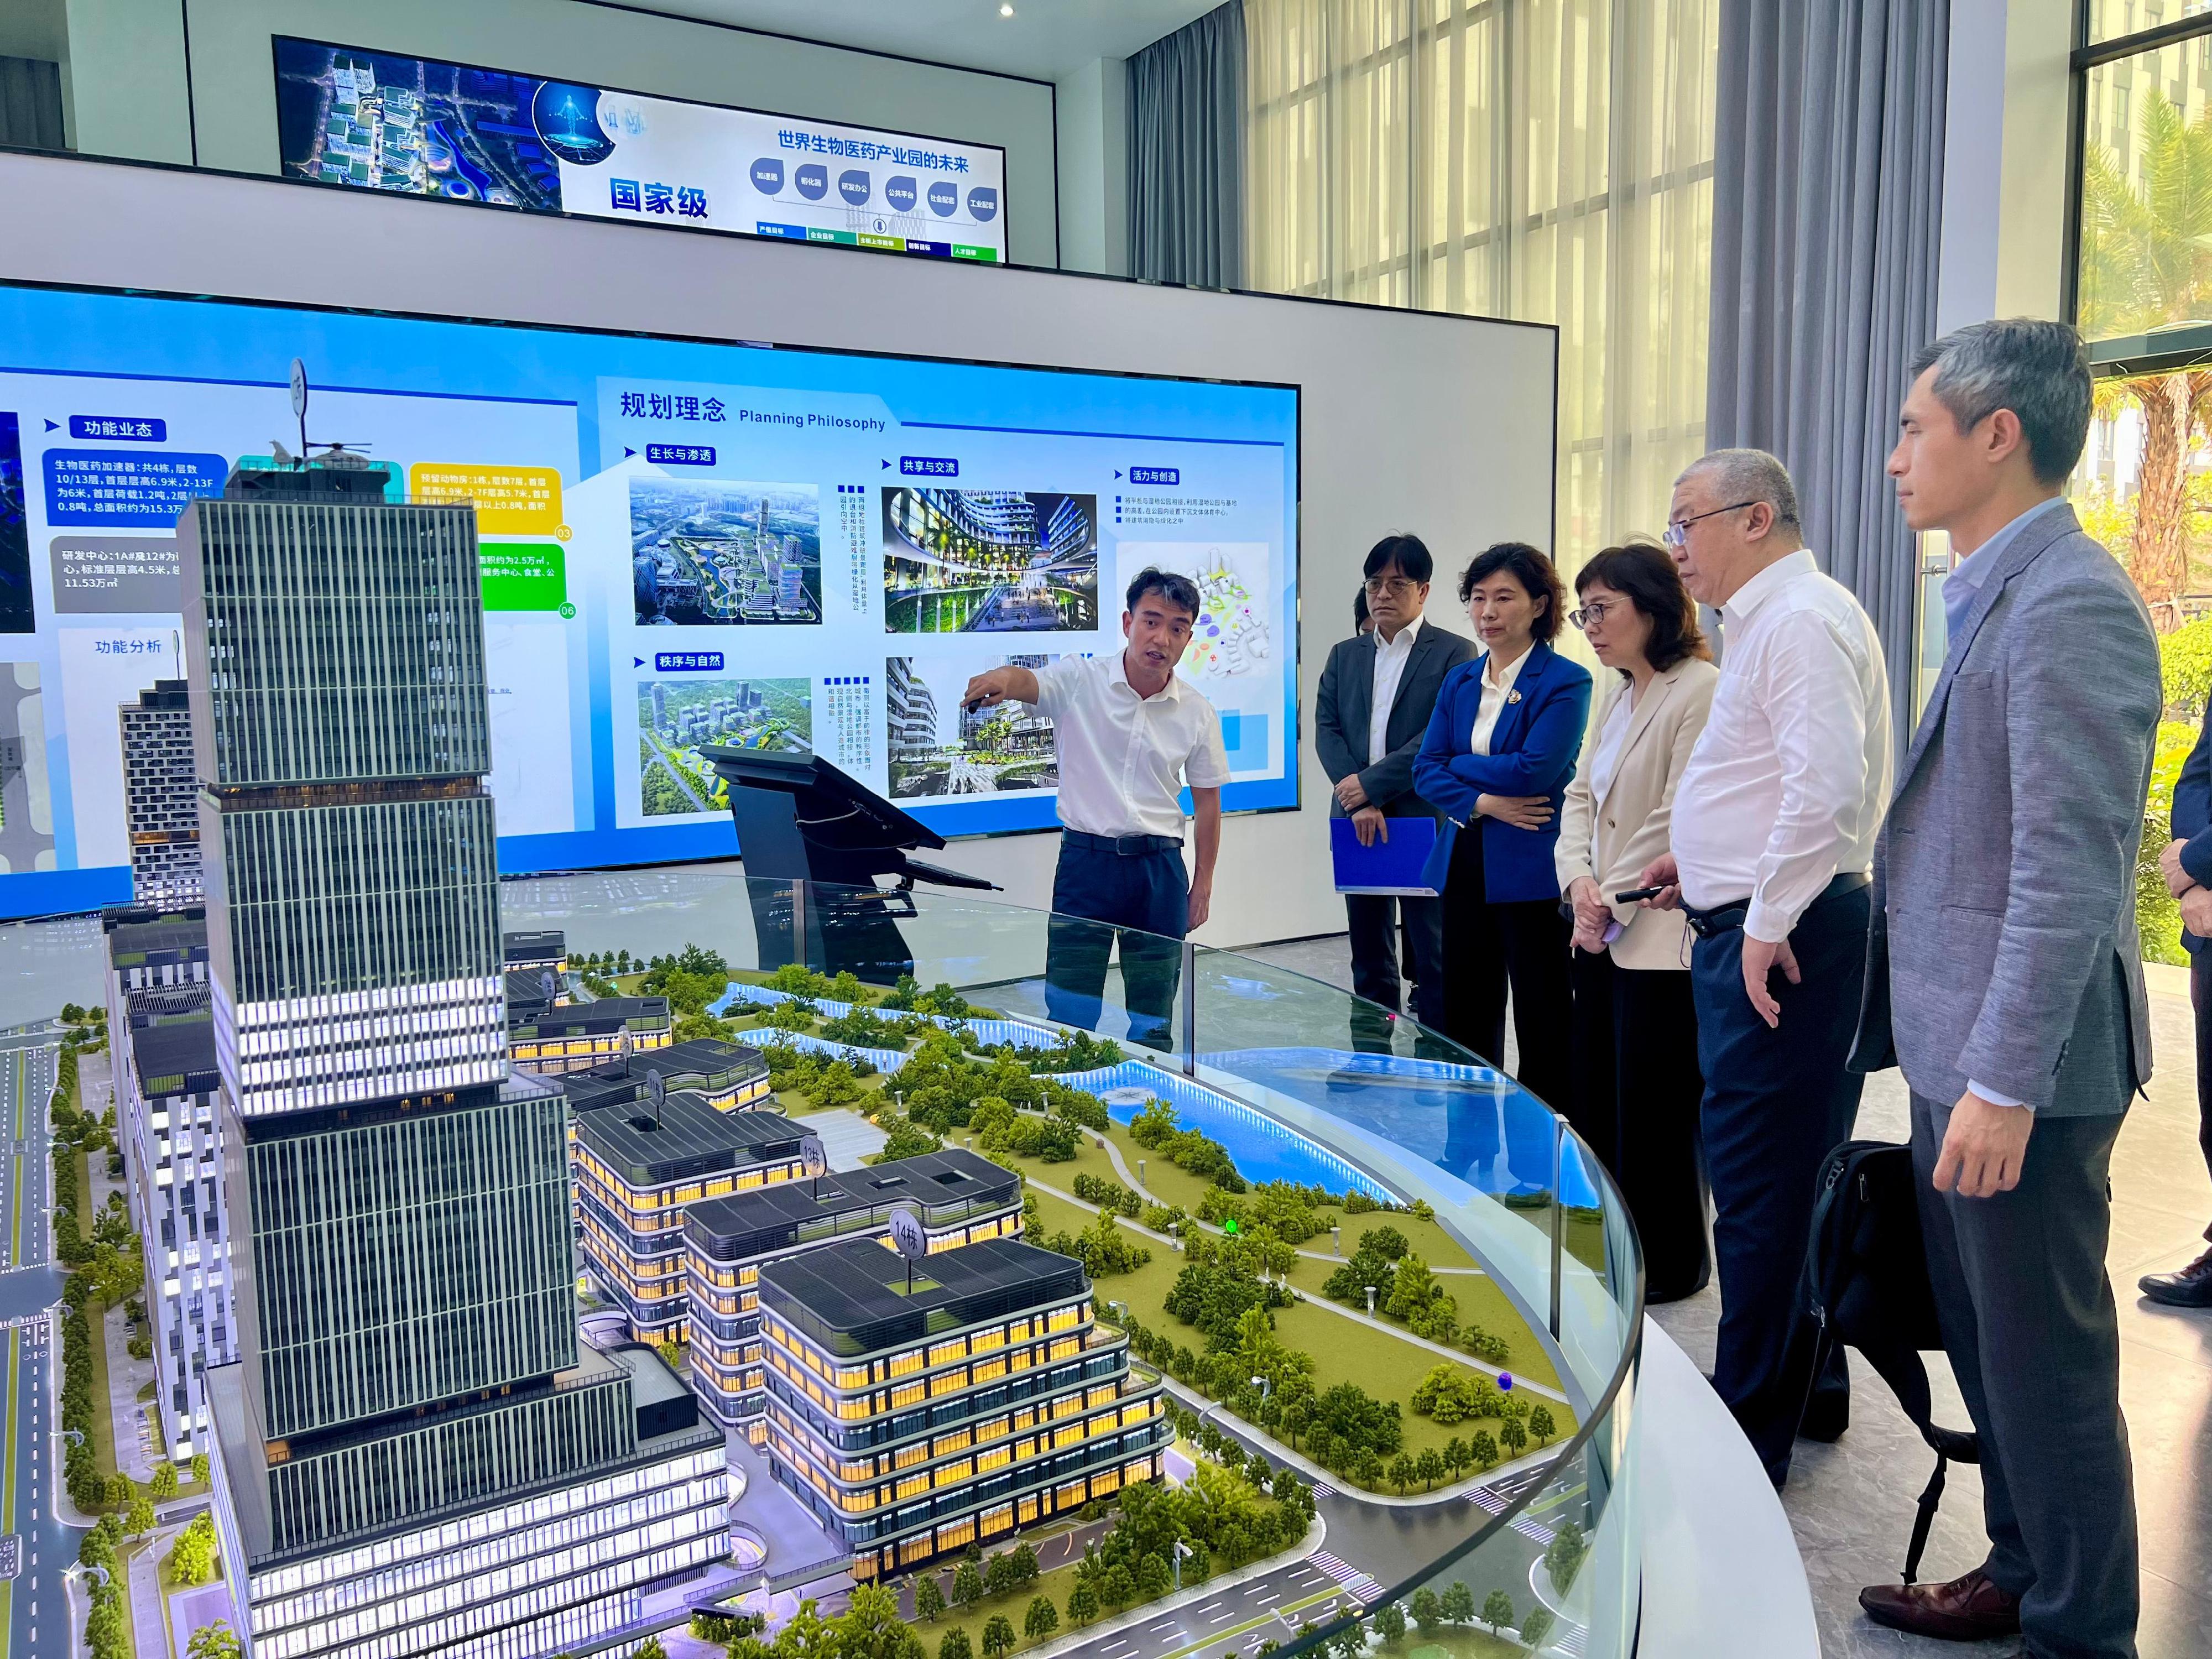 The Secretary for Development, Ms Bernadette Linn, and the Director of the Northern Metropolis Co-ordination Office, Mr Vic Yau, today (March 28) visited Luohu District and Pingshan District of Shenzhen. Photo shows Ms Linn (third right) and Mr Yau (first right) being briefed on the planning of the Biomedical Accelerator area in the Pingshan District during their visit to the area.